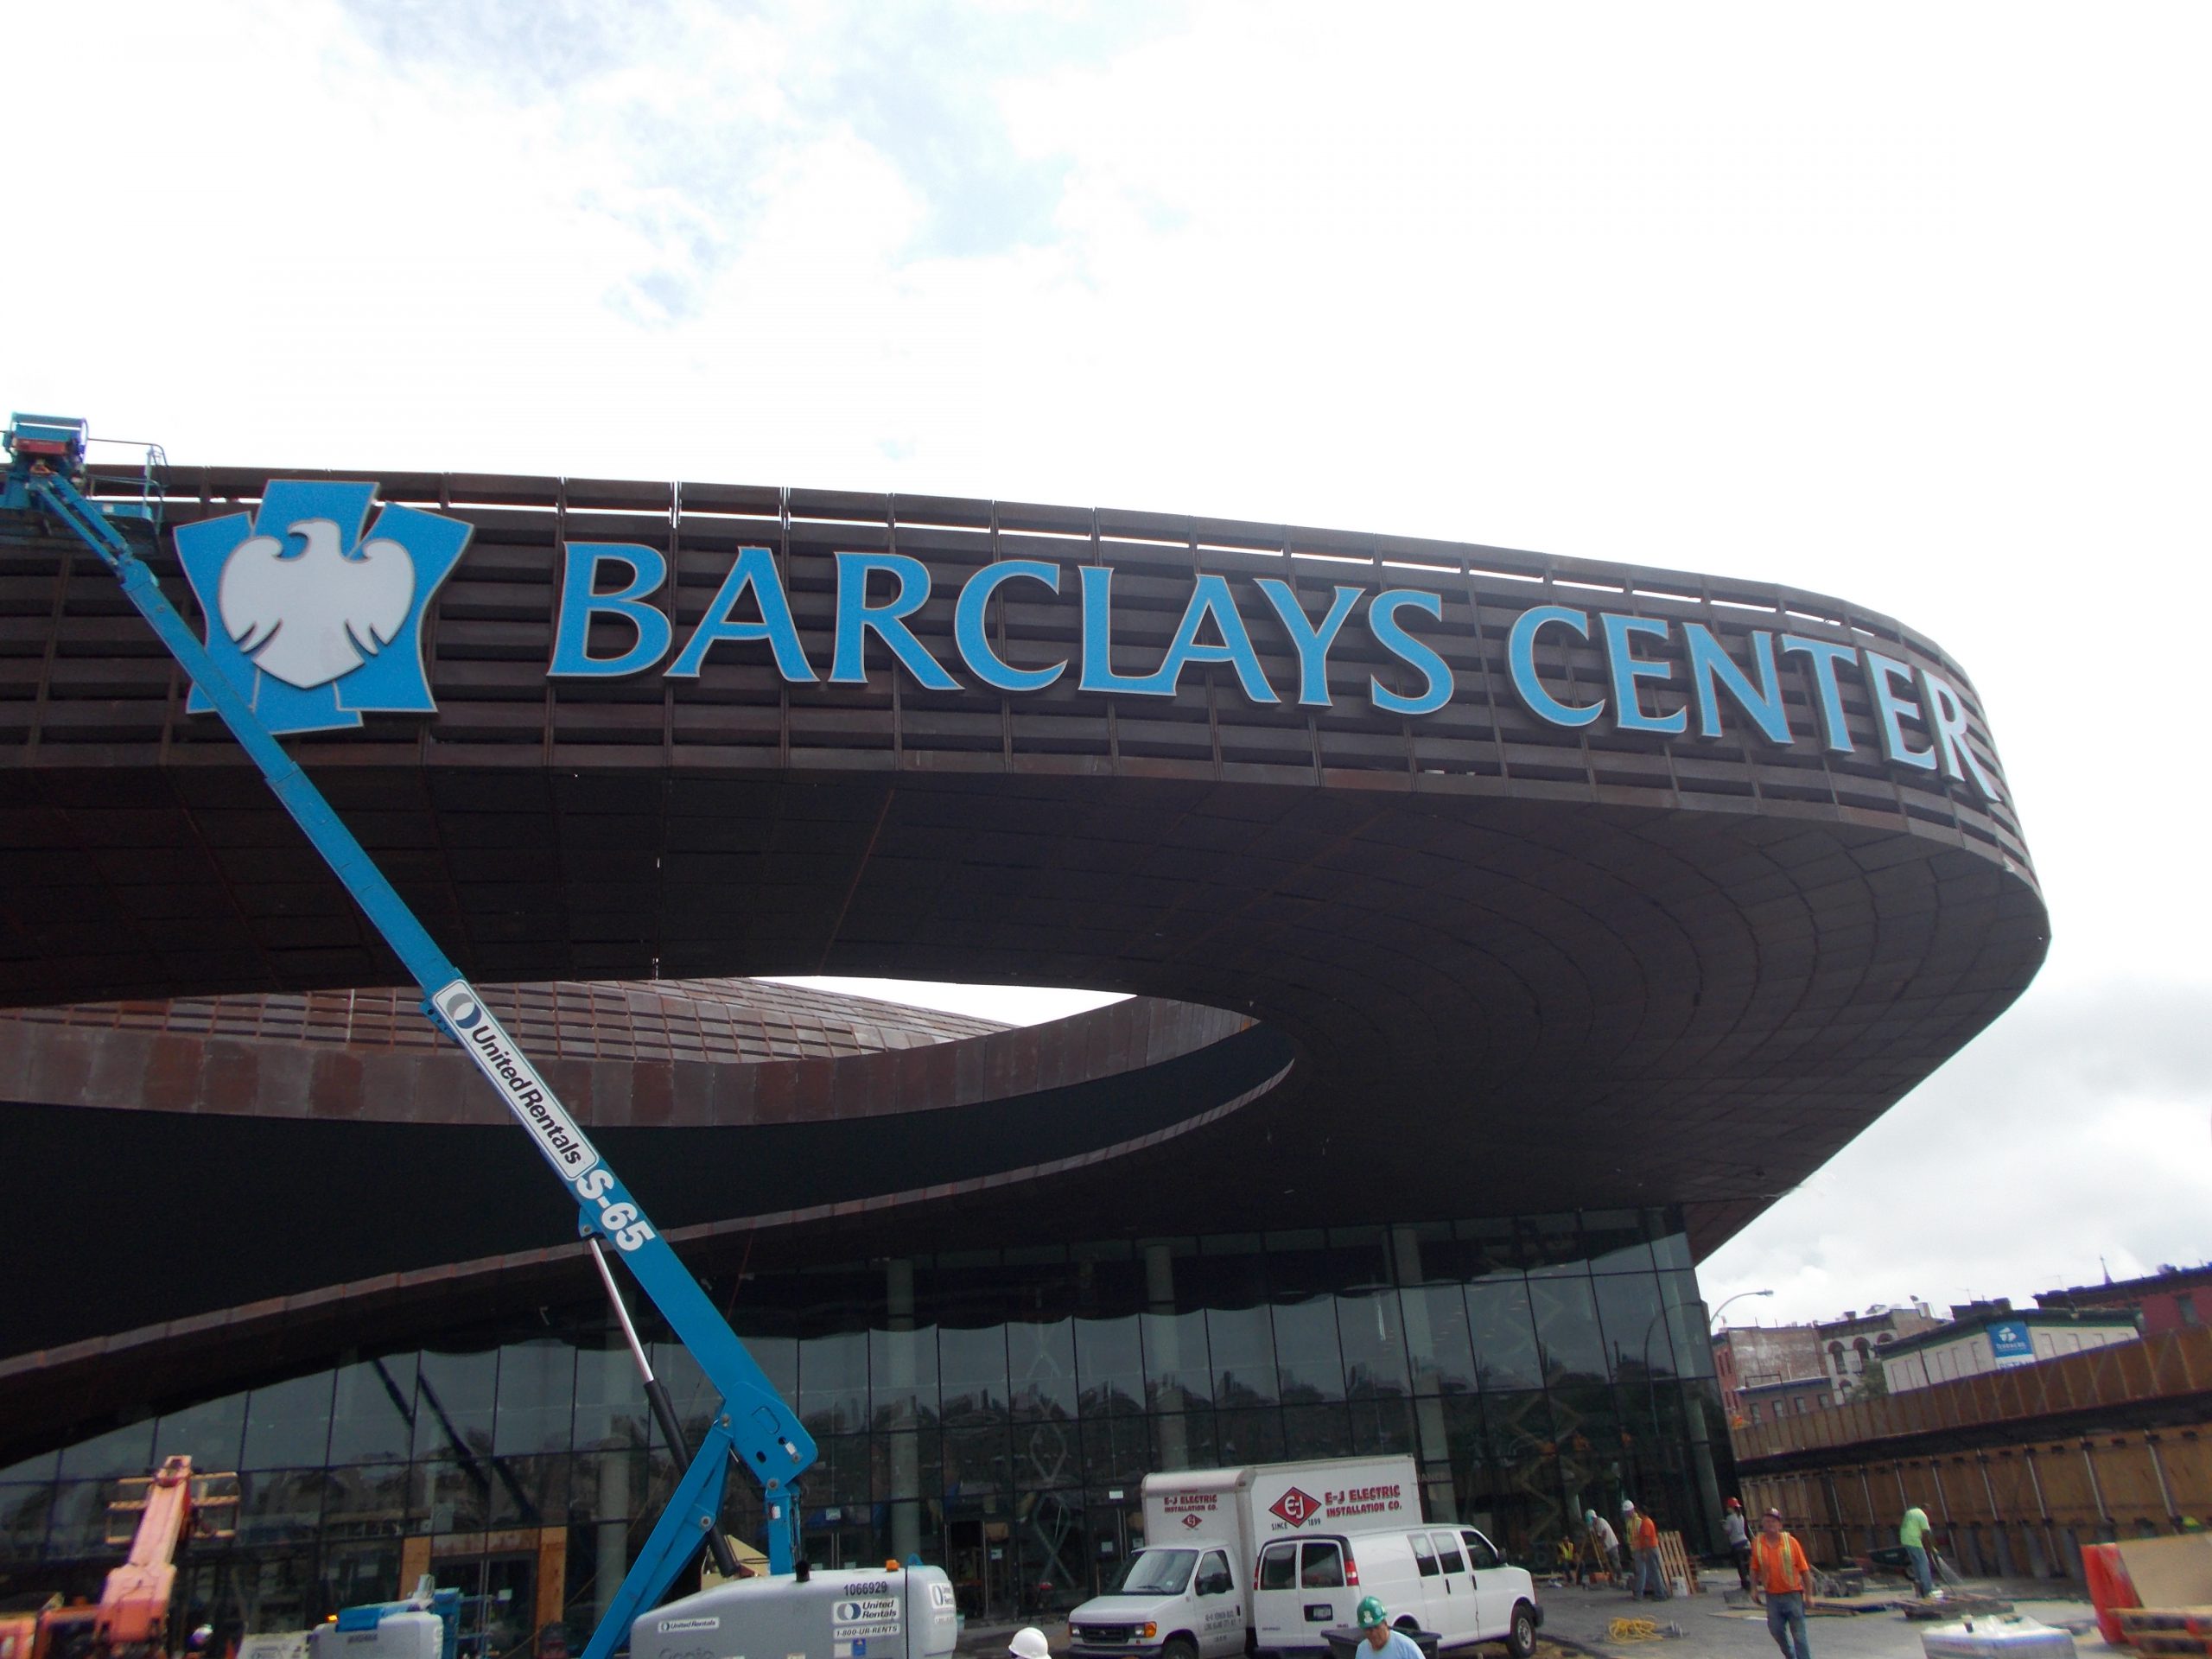 The new Barclays Center Arena is endowed with a network of more than 800  digital signage screens